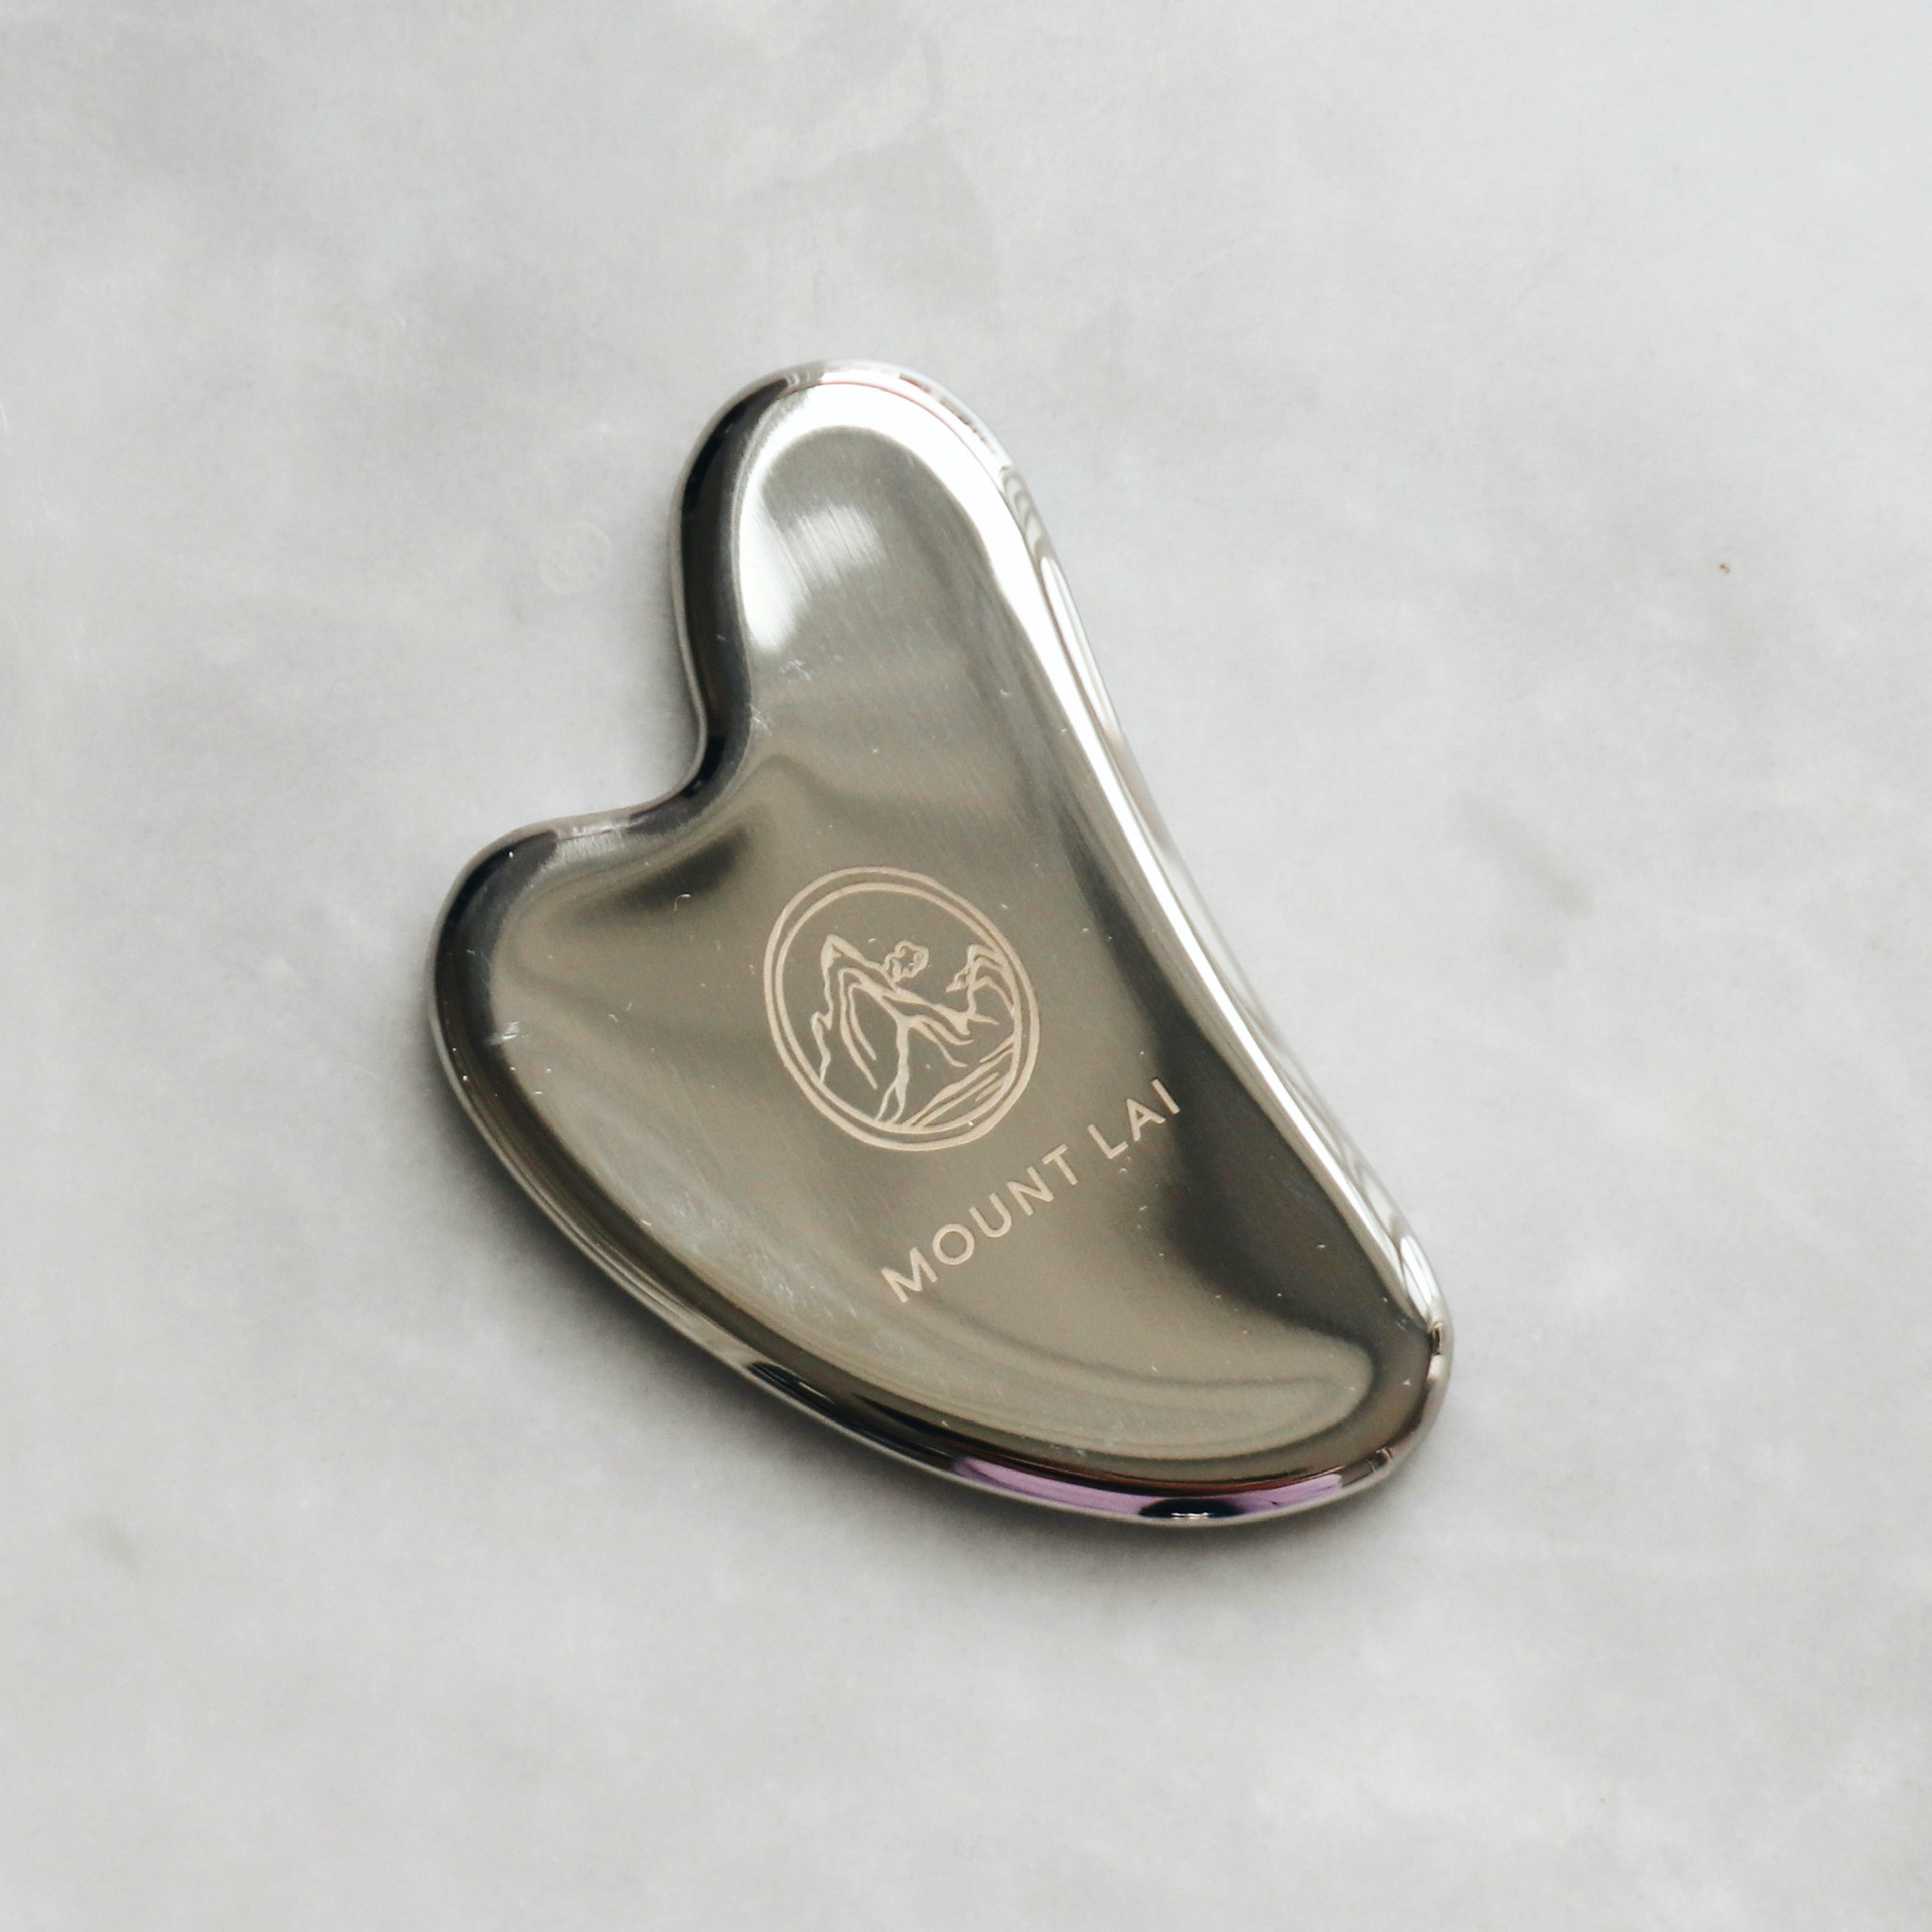 Mount Lai - The Stainless Steel Gua Sha Facial Lifting Tool